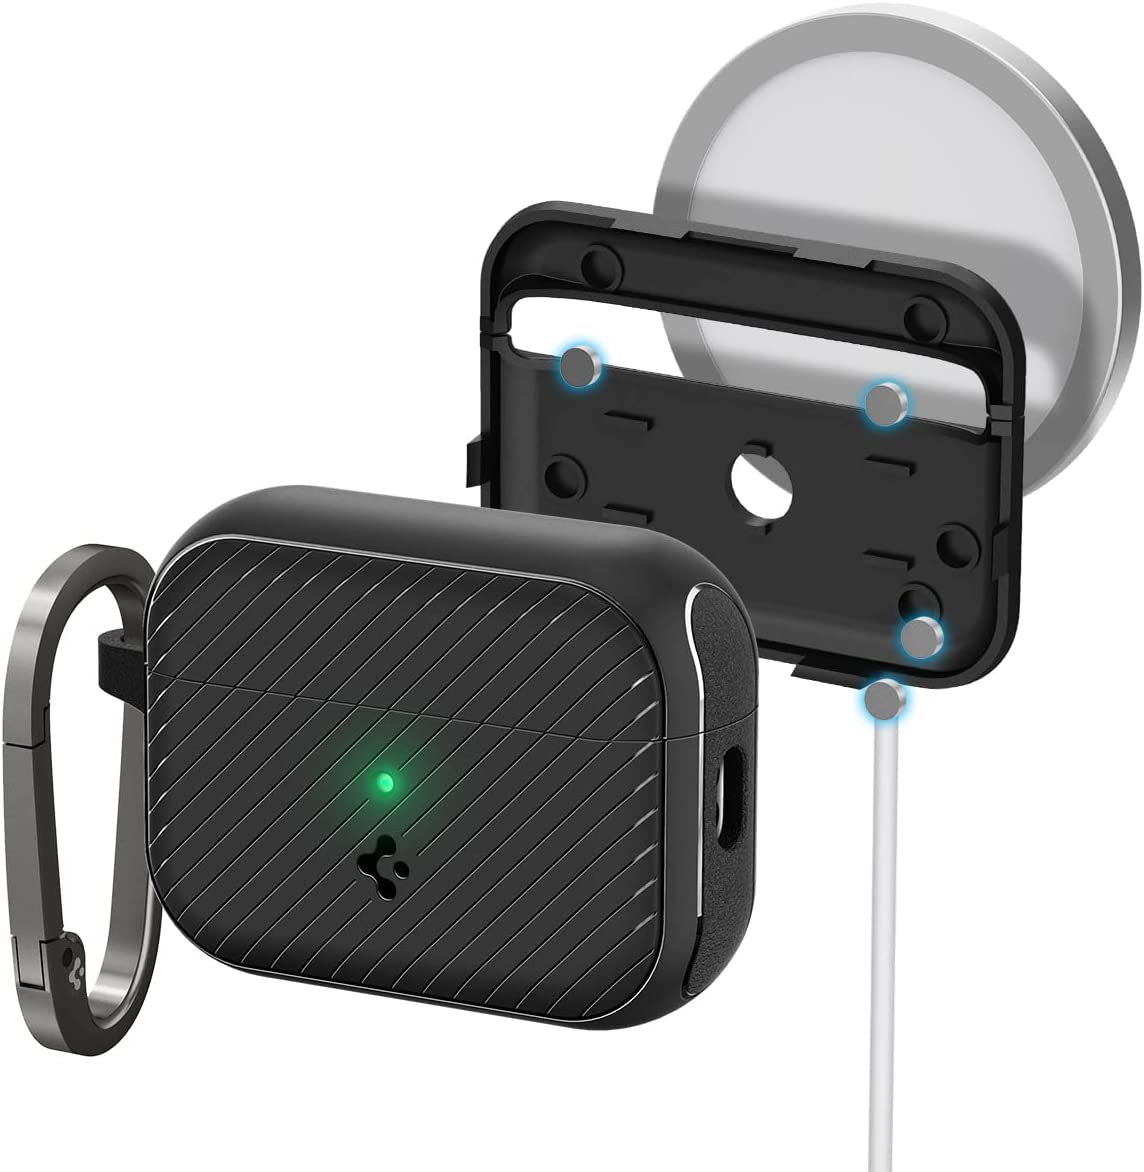 New MagSafe AirPods Pro 2 case from Spigen now available